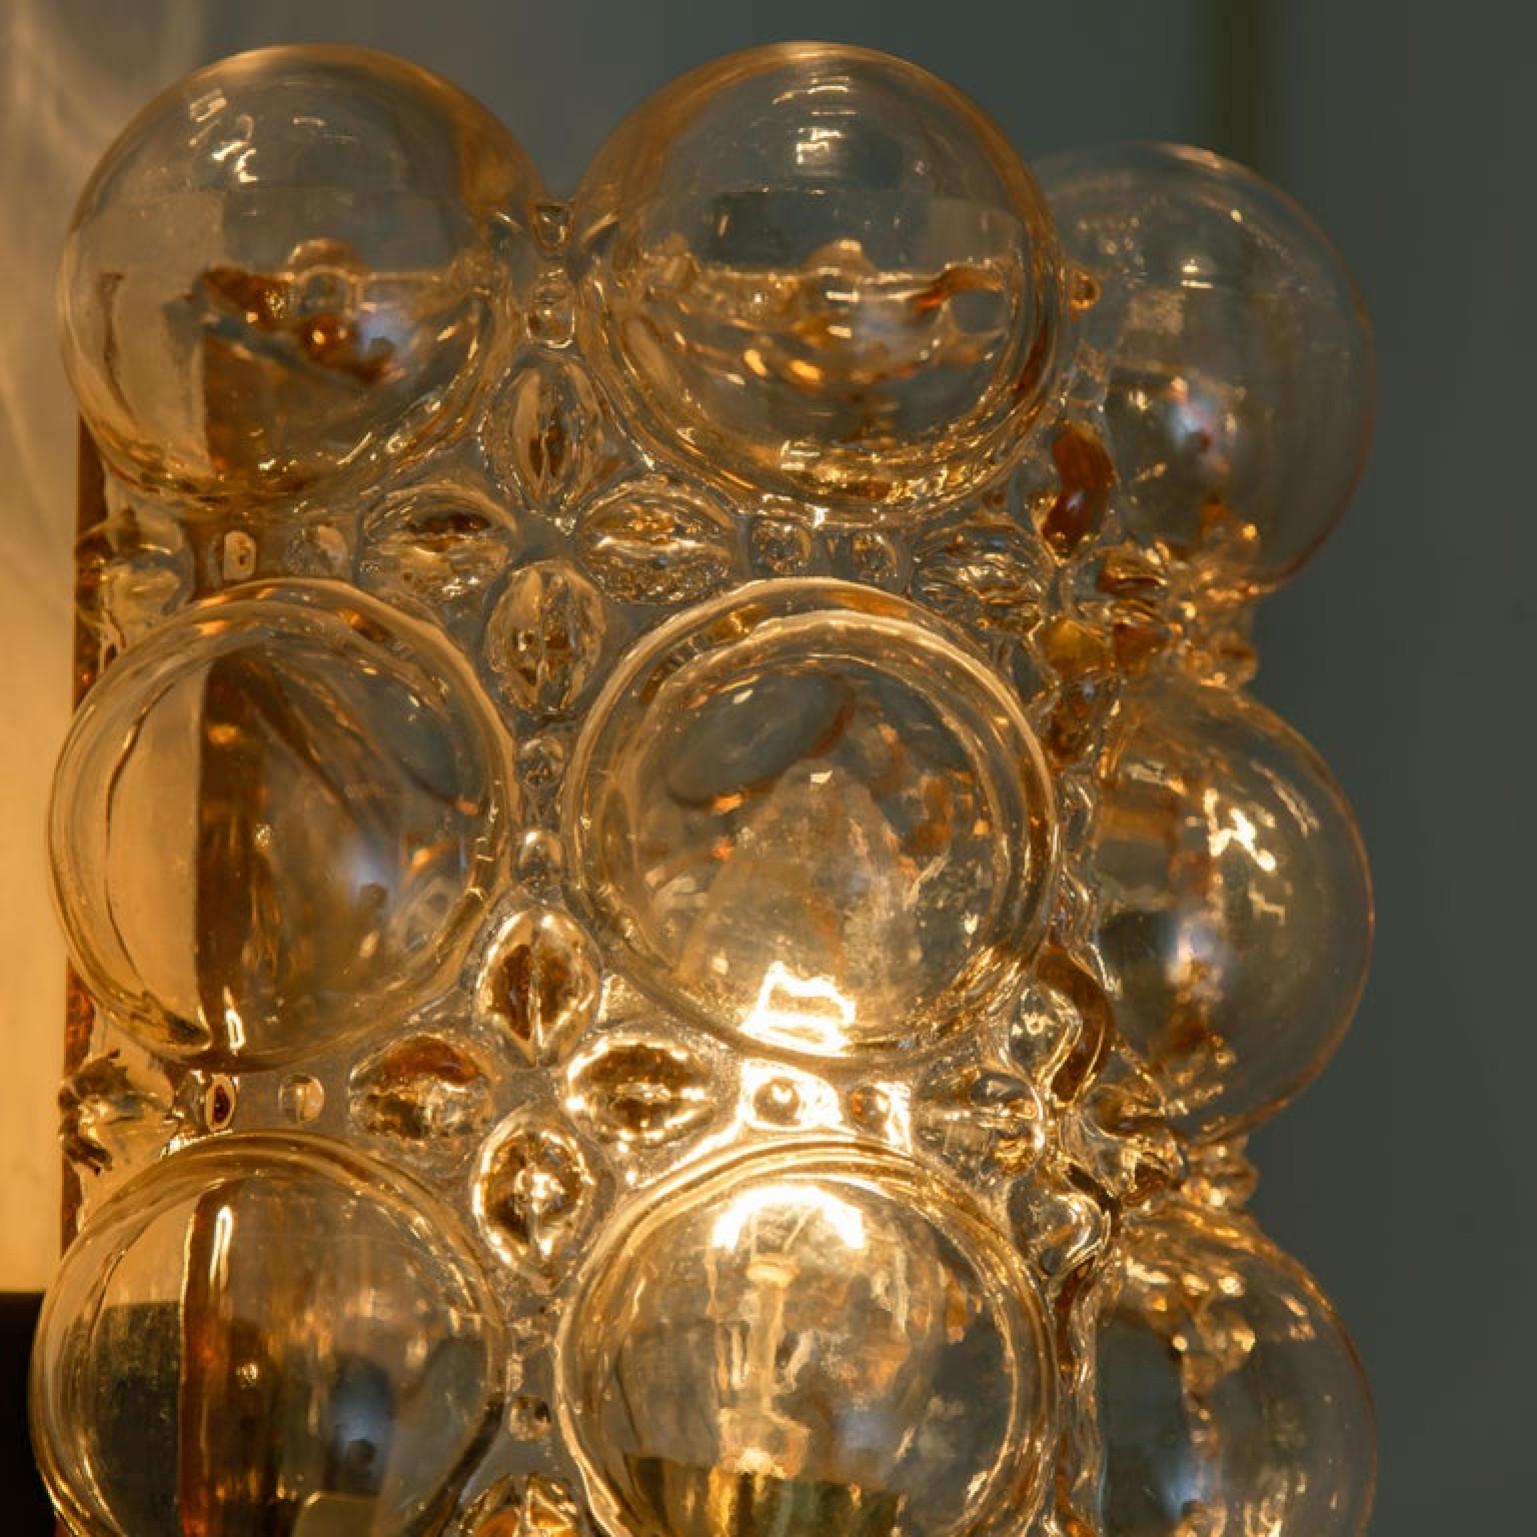 Other Pair of Glass Wall Lights Sconces by Helena Tynell for Glashütte Limburg, 1960